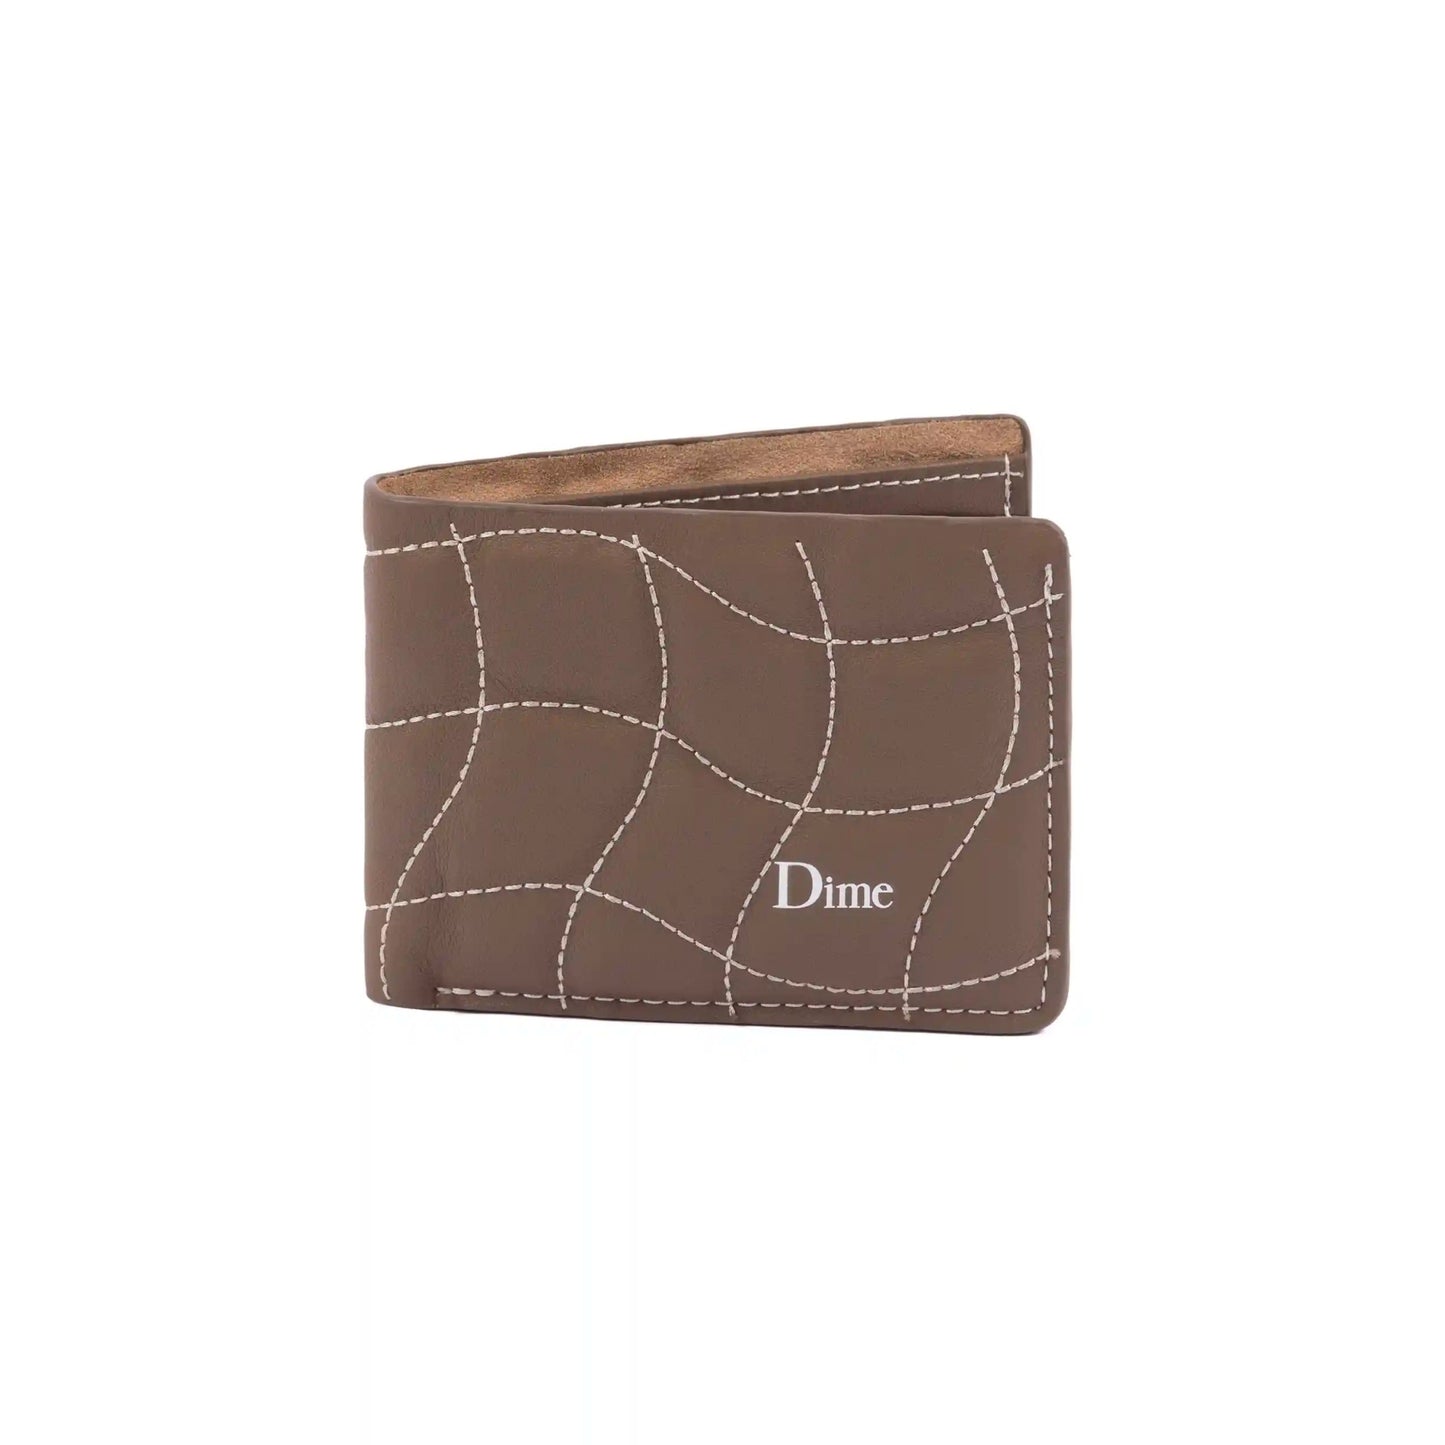 Dime Quilted Bifold Wallet, brown - Tiki Room Skateboards - 1